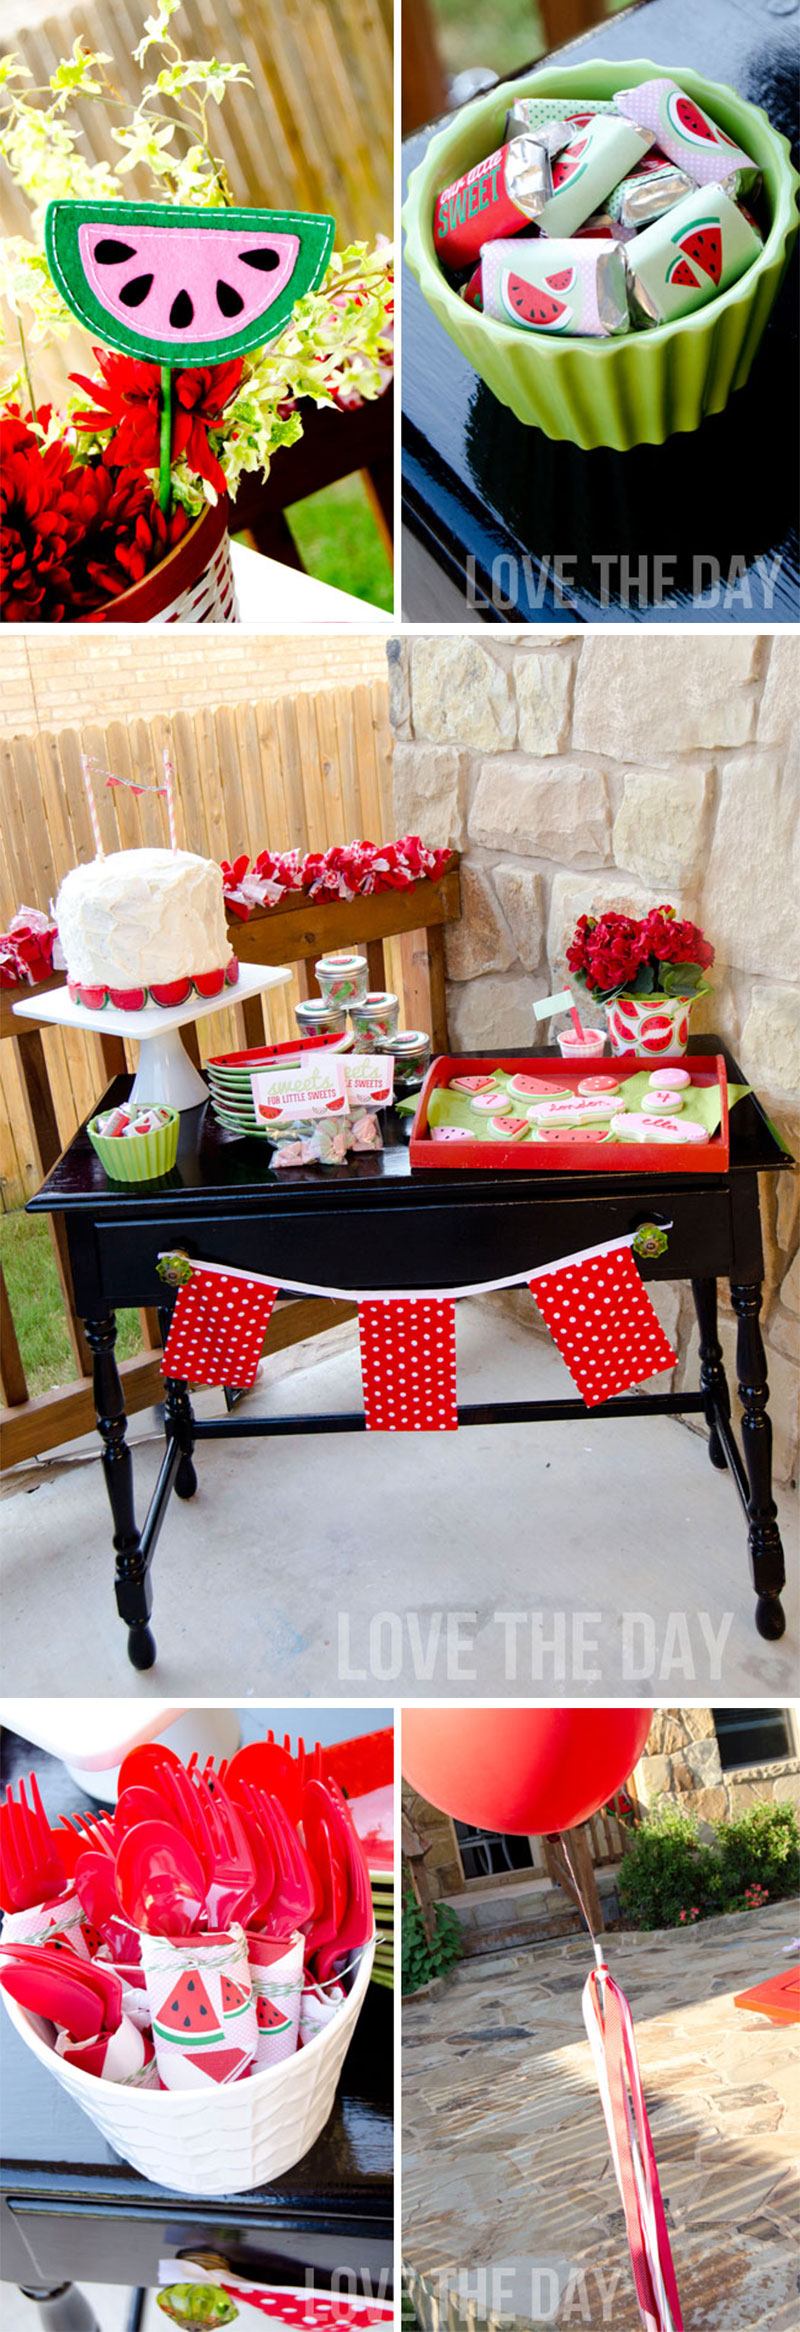 Watermelon Party Ideas by Lindi Haws of Love The Day